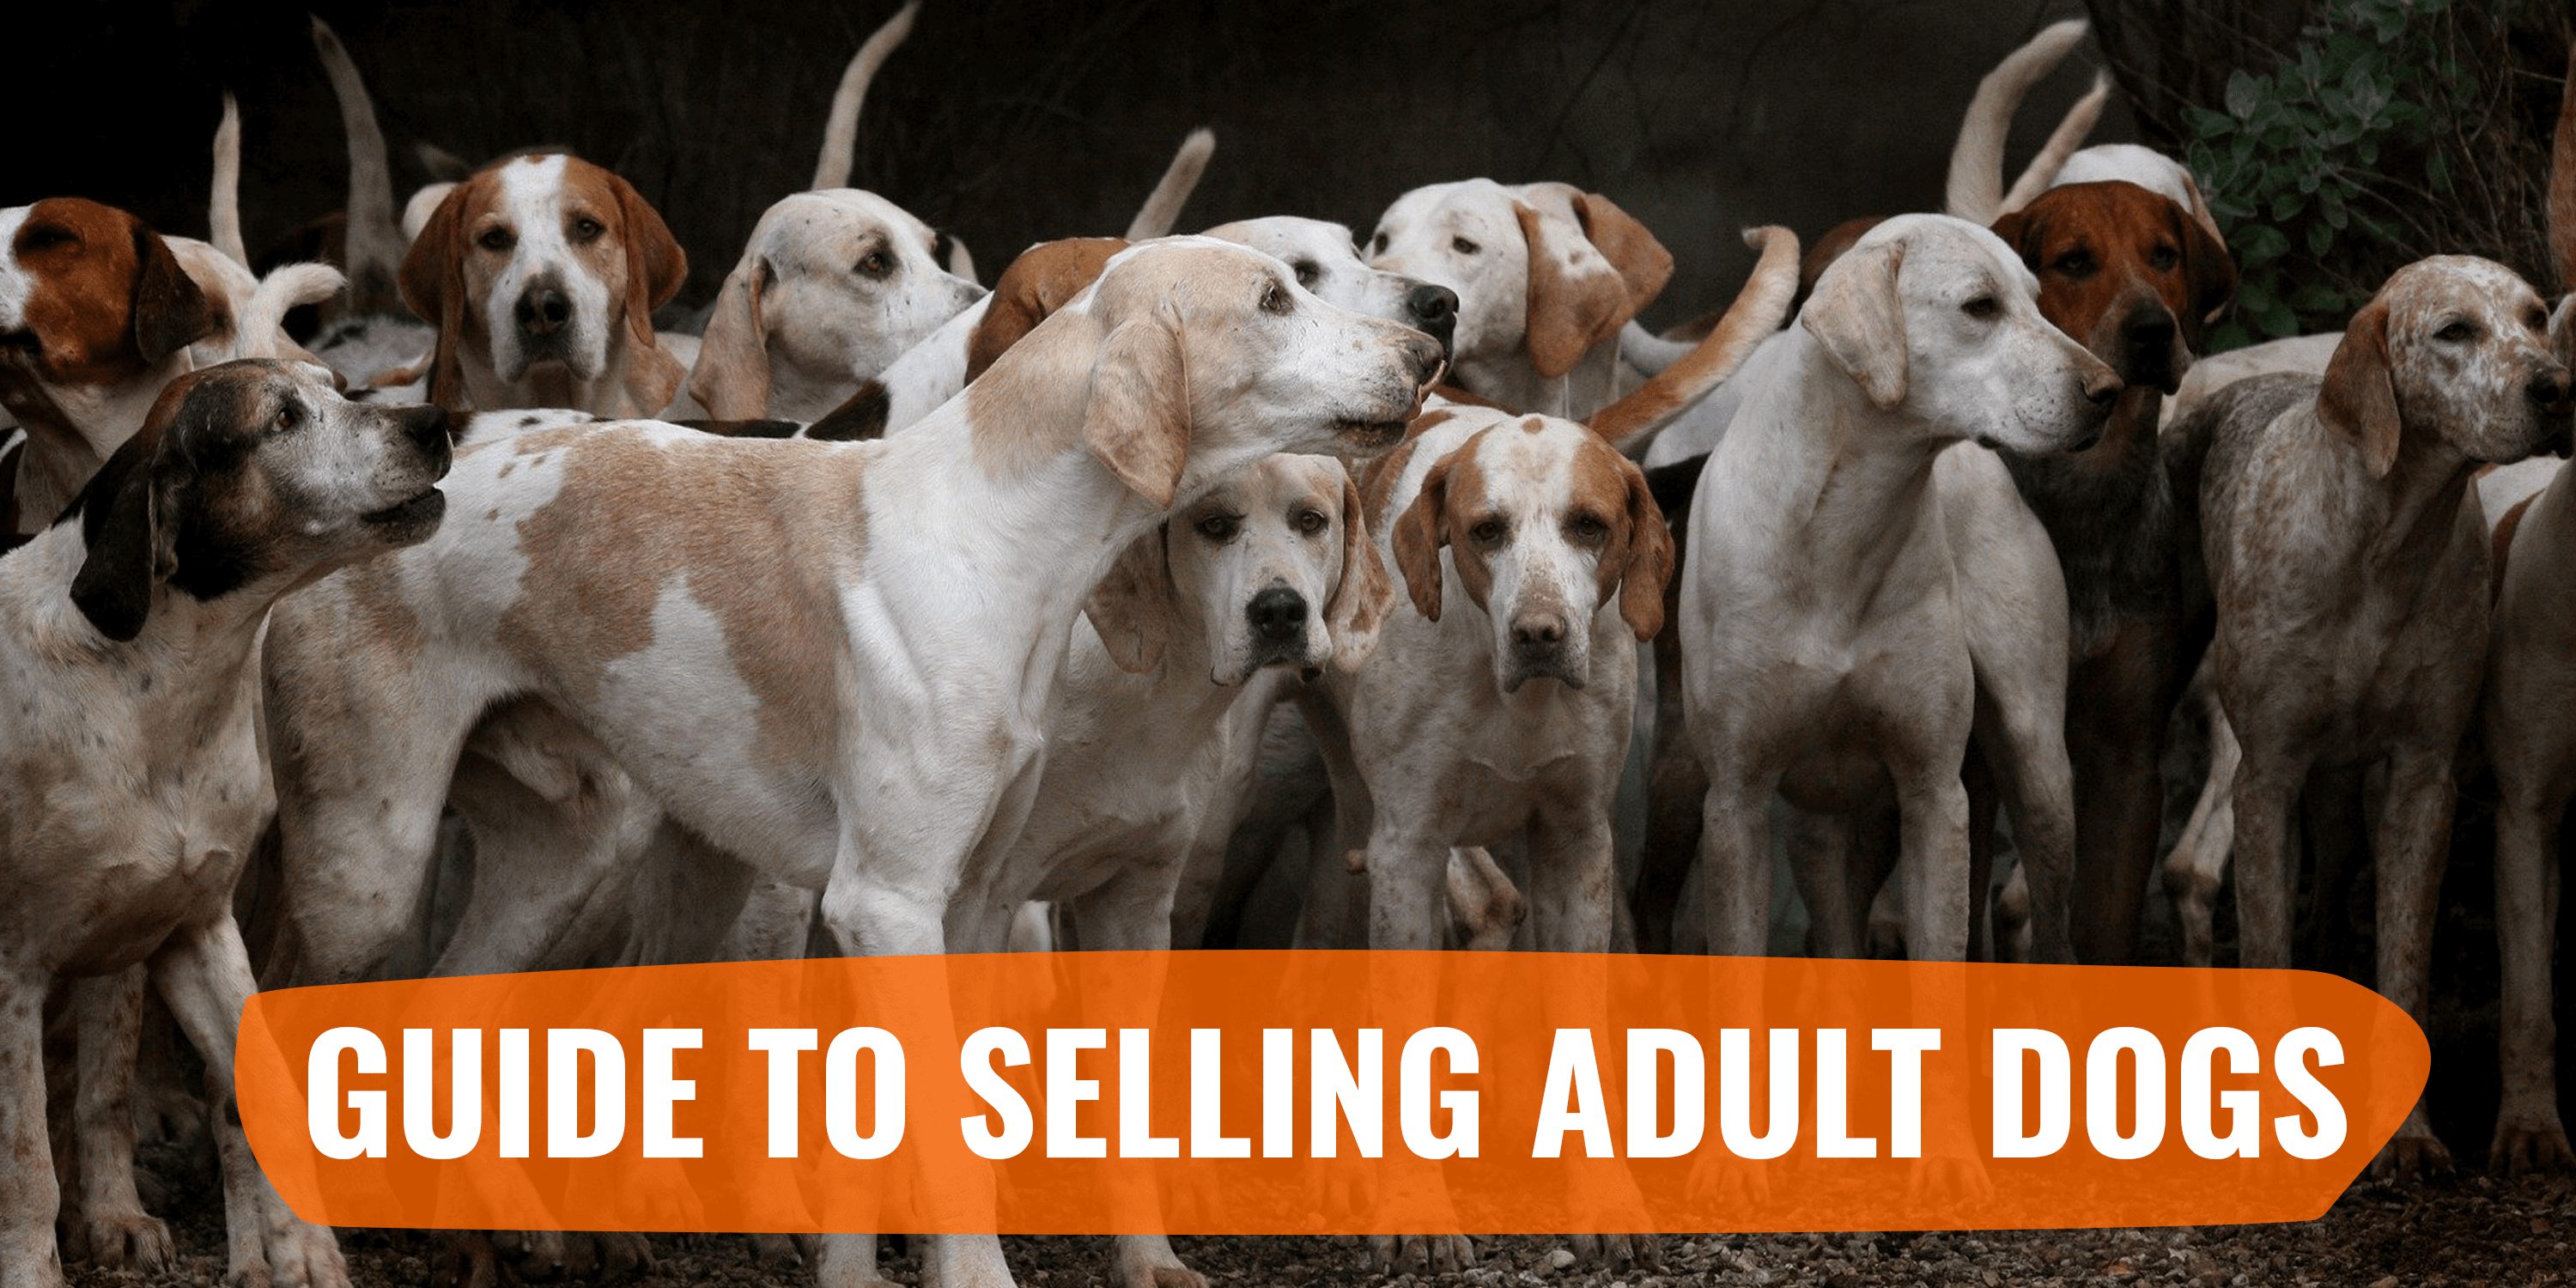 Guide to Selling Adult Dogs – hint: it's harder than selling puppies!